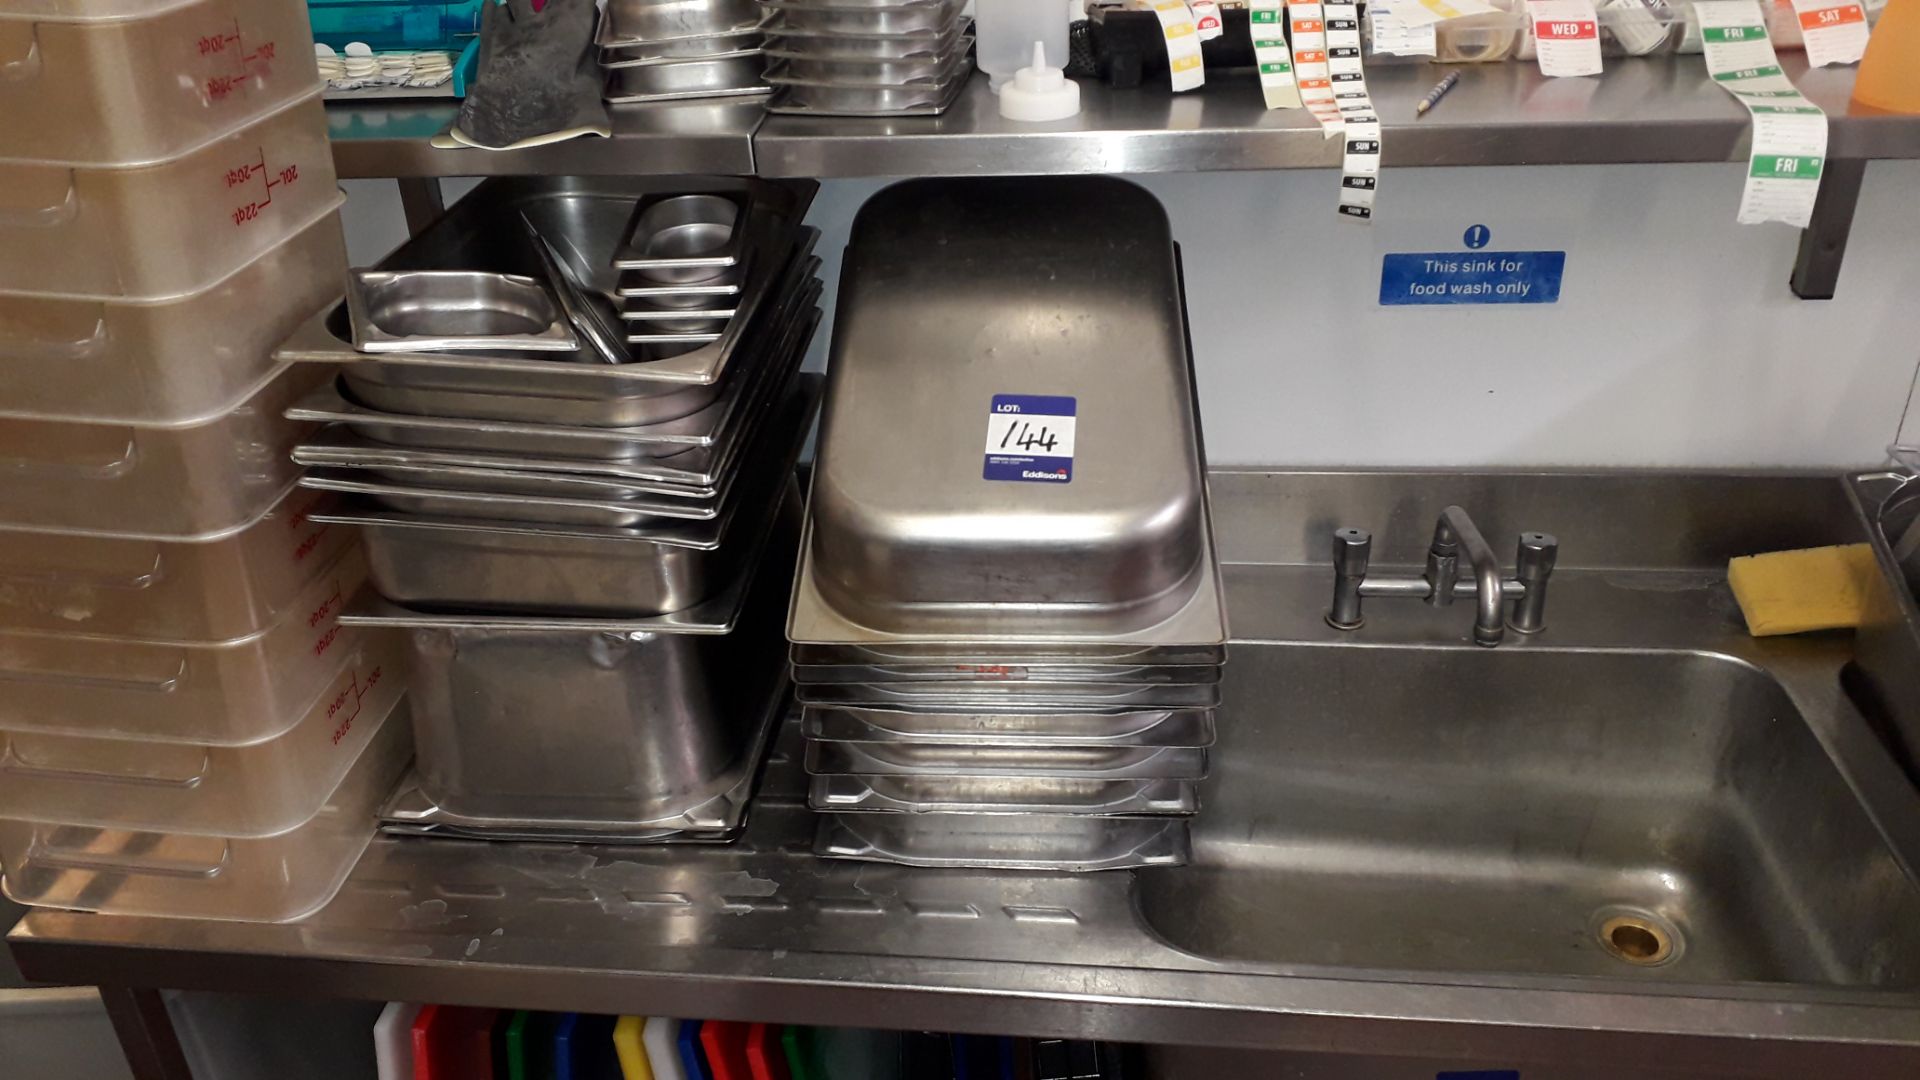 Large Quantity of Stainless Steel Gastronorme and other Trays to Kitchen - Image 7 of 8